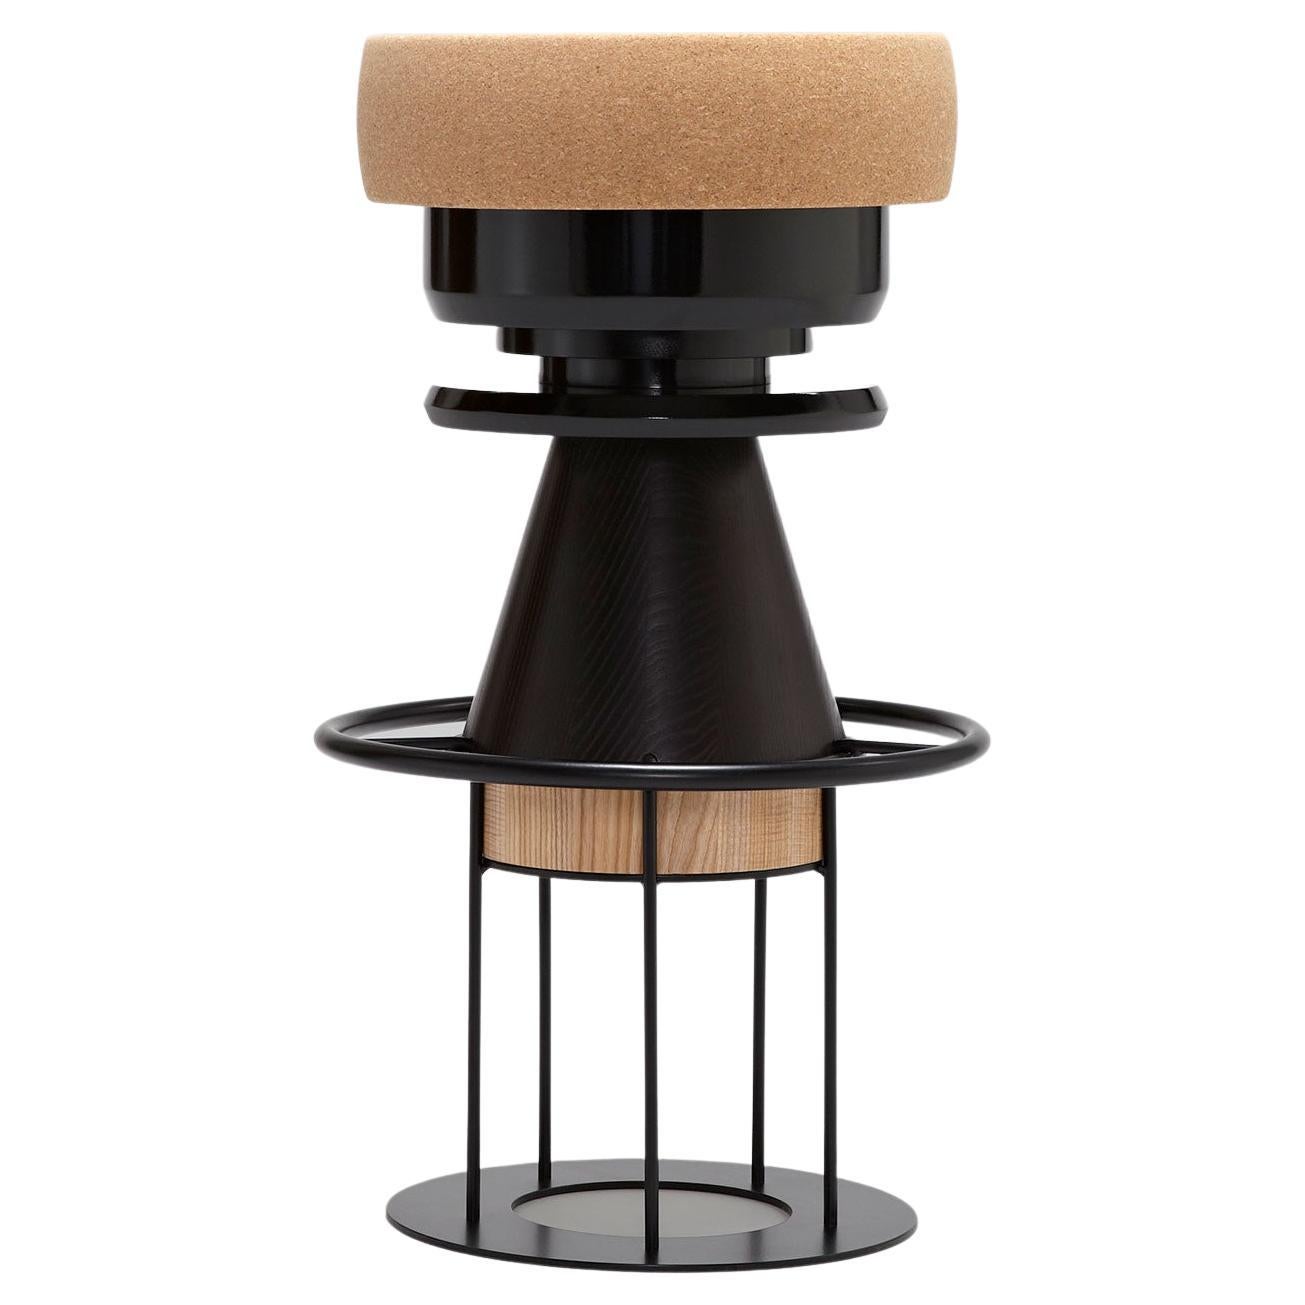 Tembo Stool, Shades of Black, by Note Design Studio for La Chance For Sale